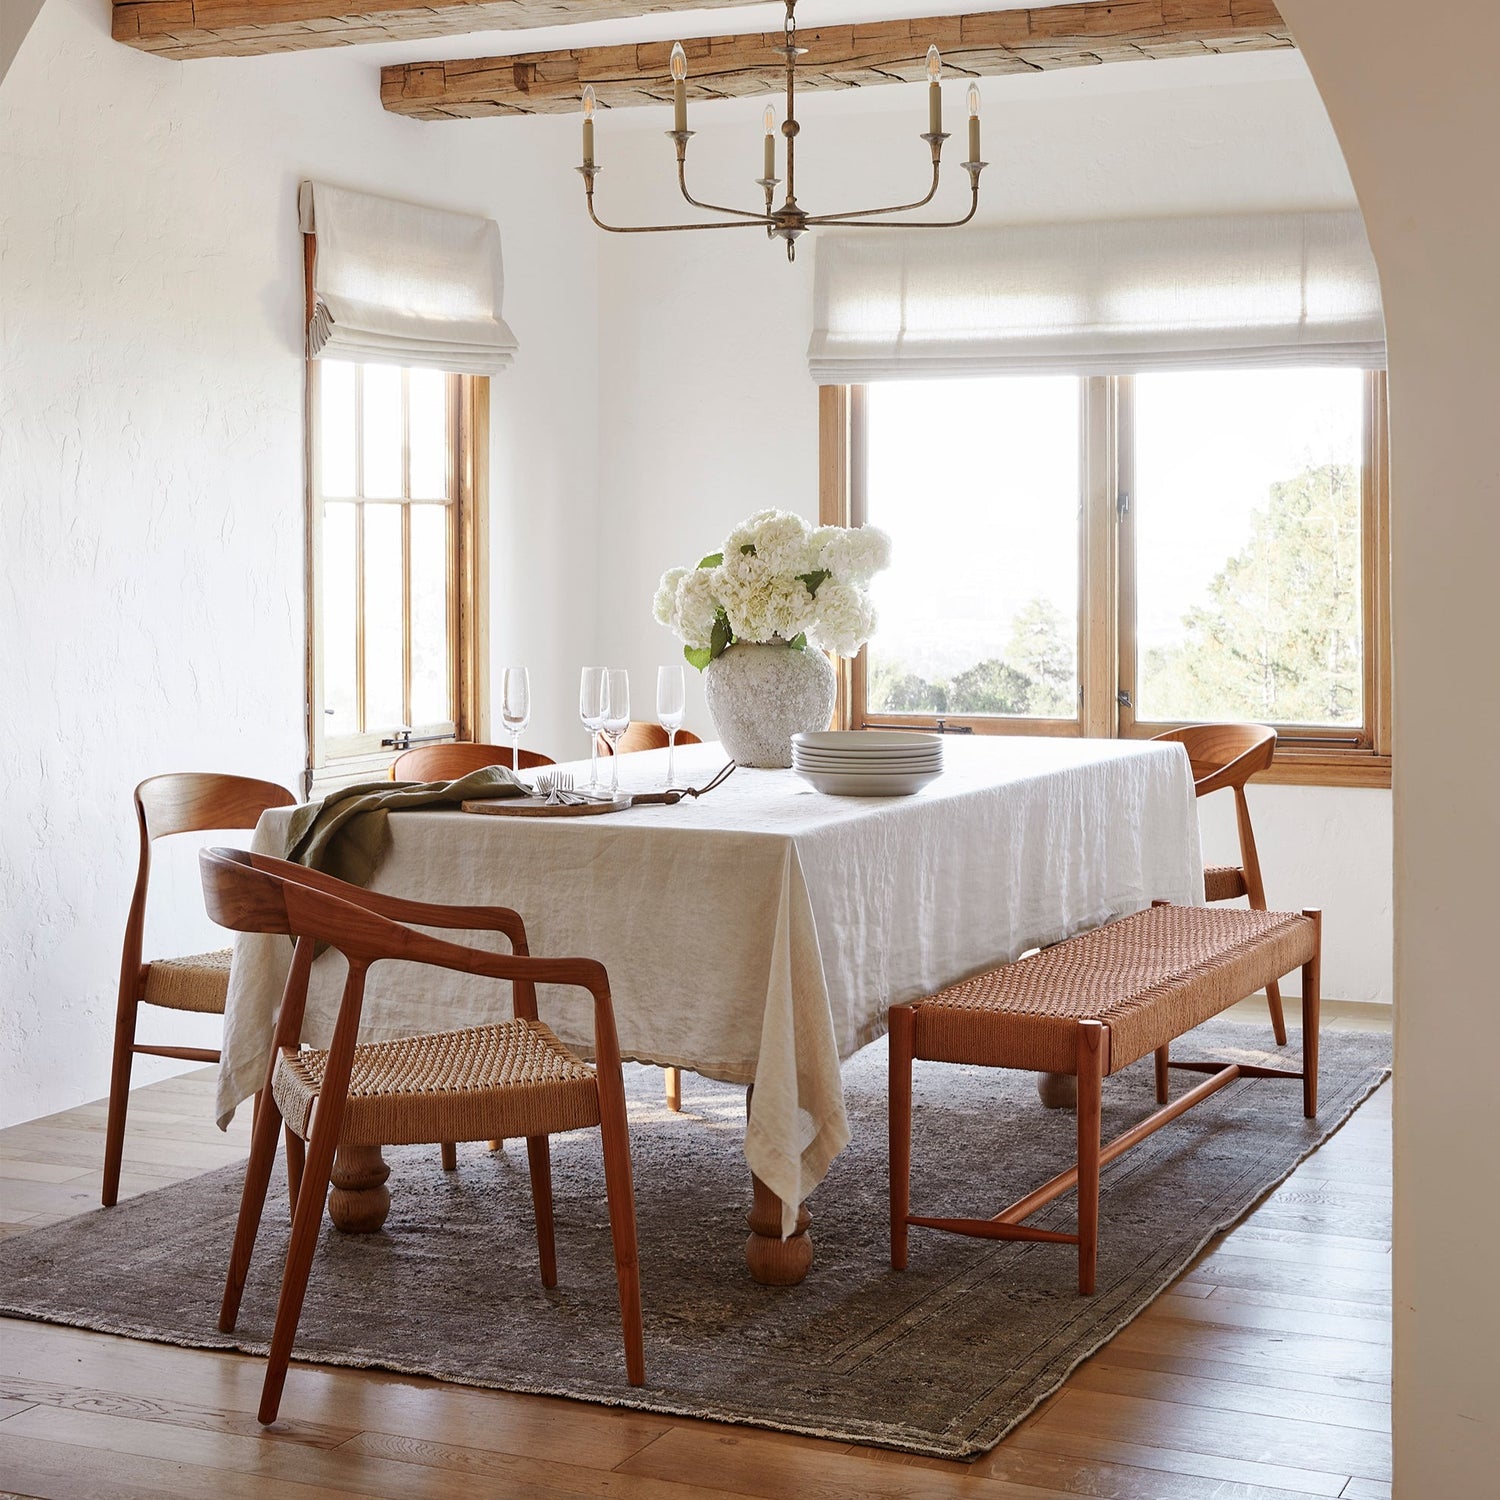 ingrid woven bench at dining table